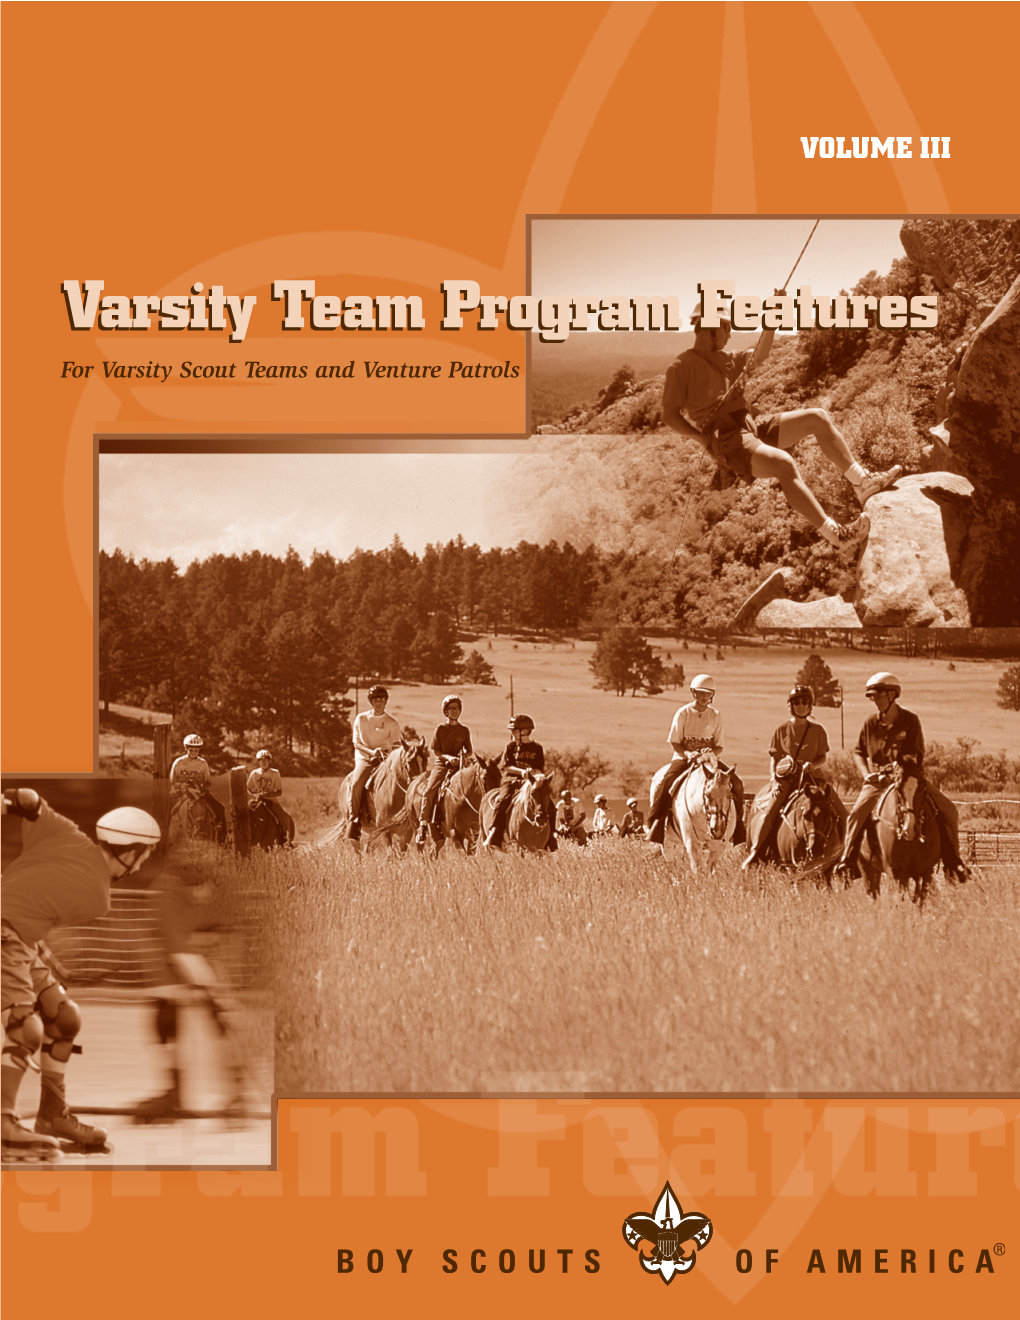 Varsity Team Program Features Volume III for Varsity Scout Teams and Venture Patrols 34839 ISBN 978-0-8395-4839-3 © 2000 Boy Scouts of America 2008 Printing Contents